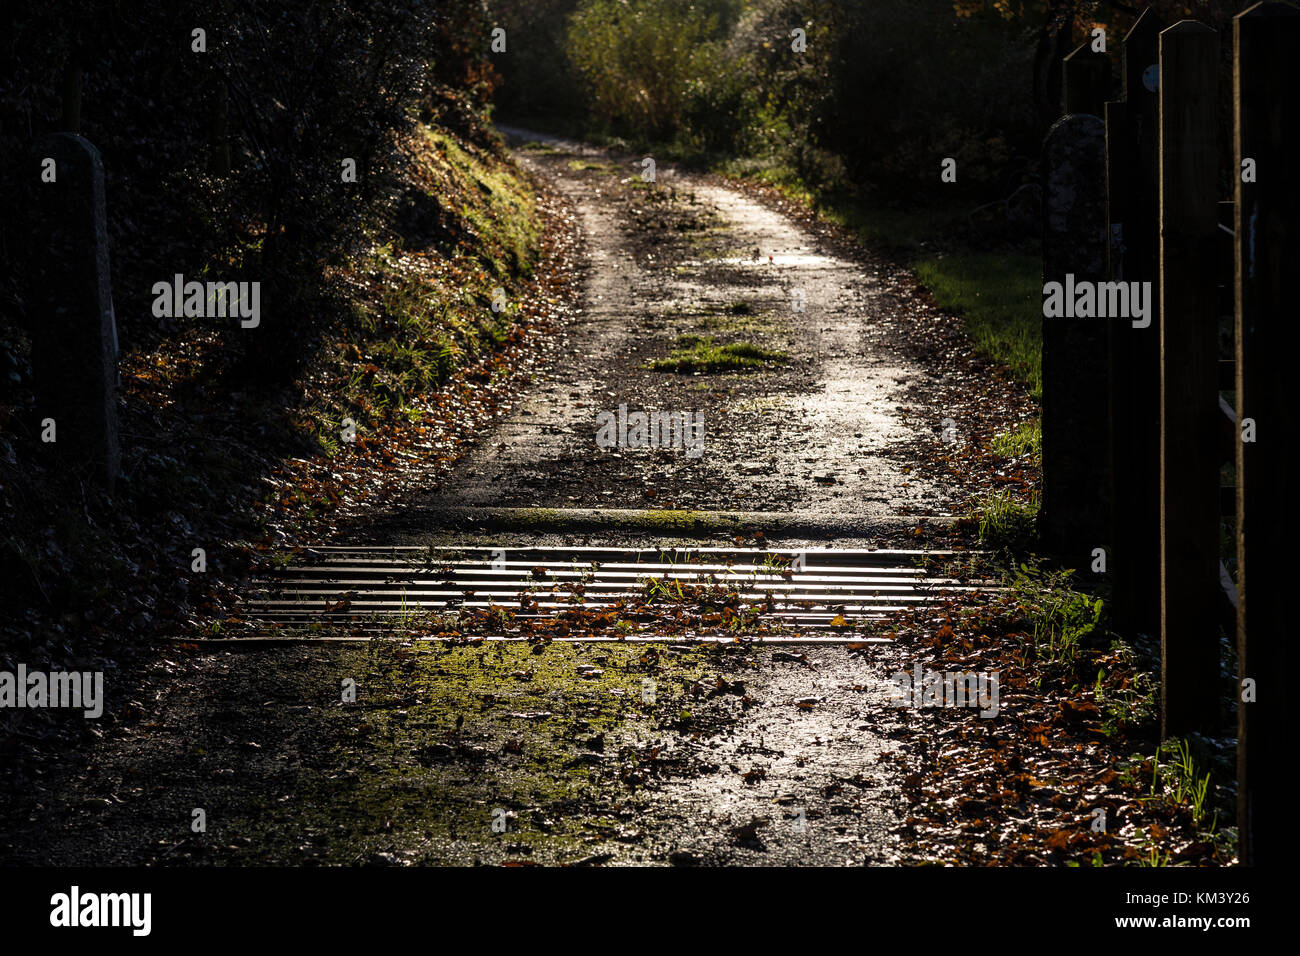 byroad, byway, bridleway, bridle path, path, pathway, footpath, way, towpath, trail, track, road, street, alley, alleyway, roadway, passage, thoroughf Stock Photo